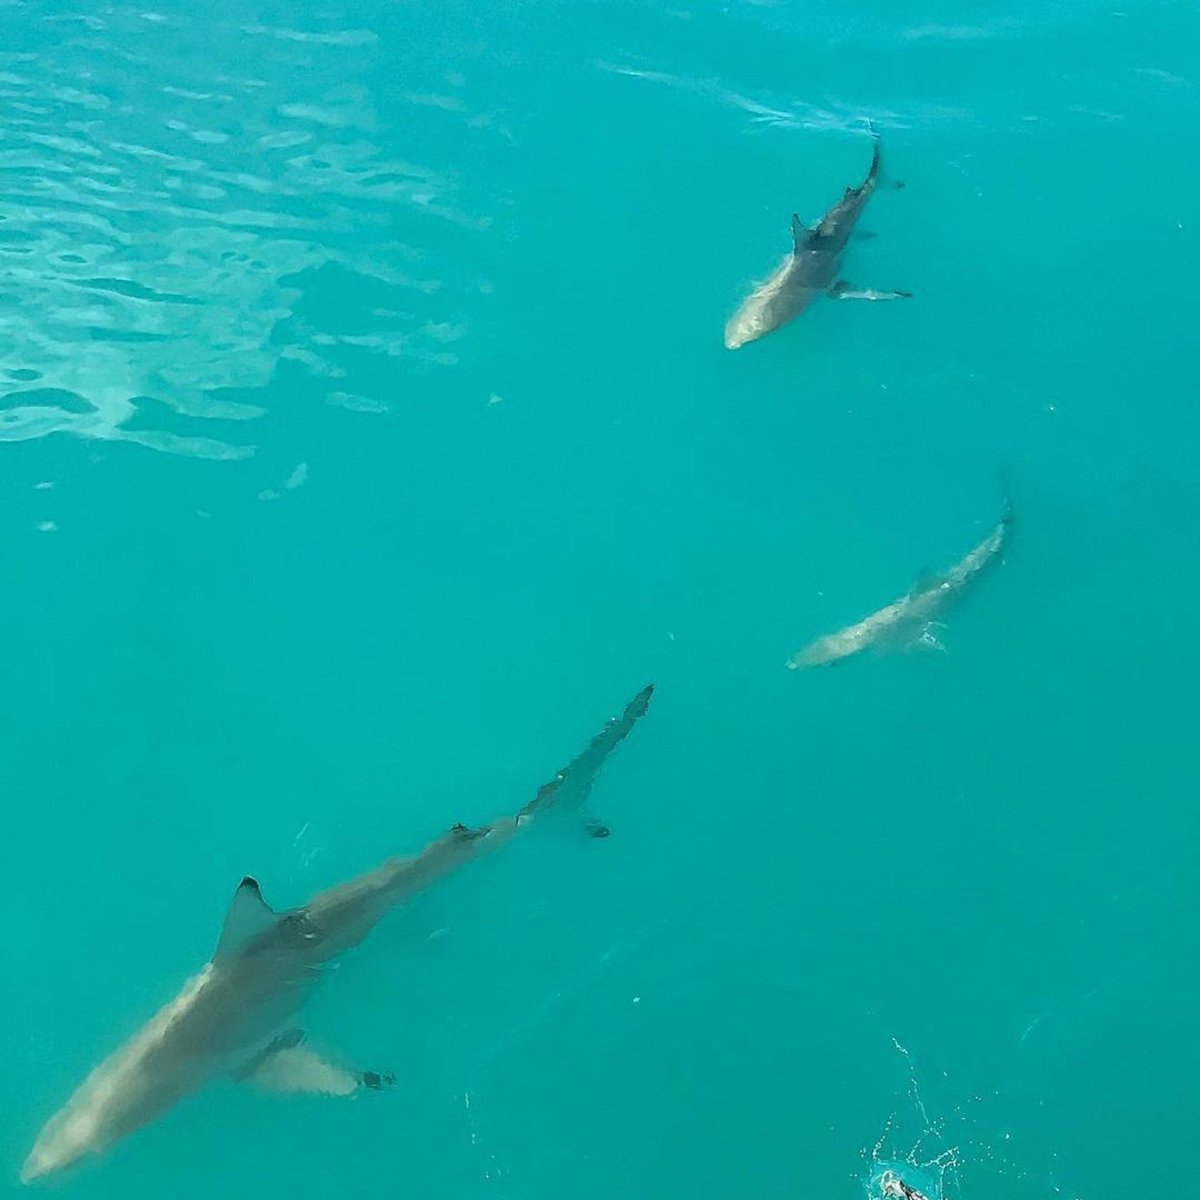 One of these is not like the other. Can anyone identify both species? 

They were spotted in channels of mangrove forests in The Bahamas.
〰️〰️〰️
📸: @gbrllozada 

#shark #sharks #questionoftheday #lovesharks #savesharks #joinus #babyshark #marinebiology #saltlife #sealife